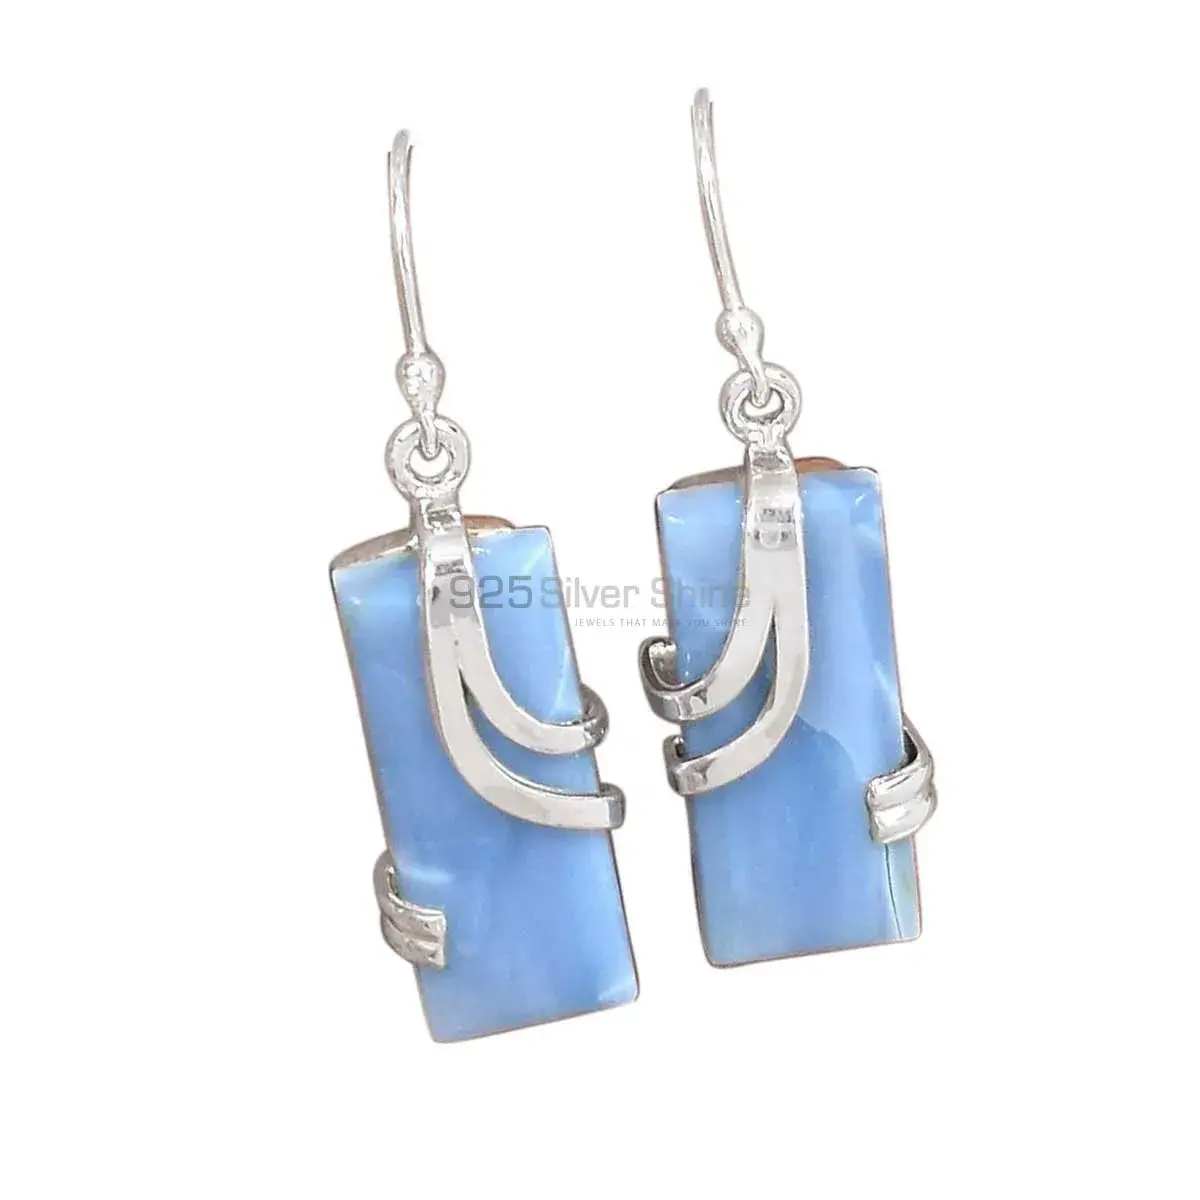 Affordable 925 Sterling Silver Handmade Earrings Suppliers In Agate Gemstone Jewelry 925SE2086